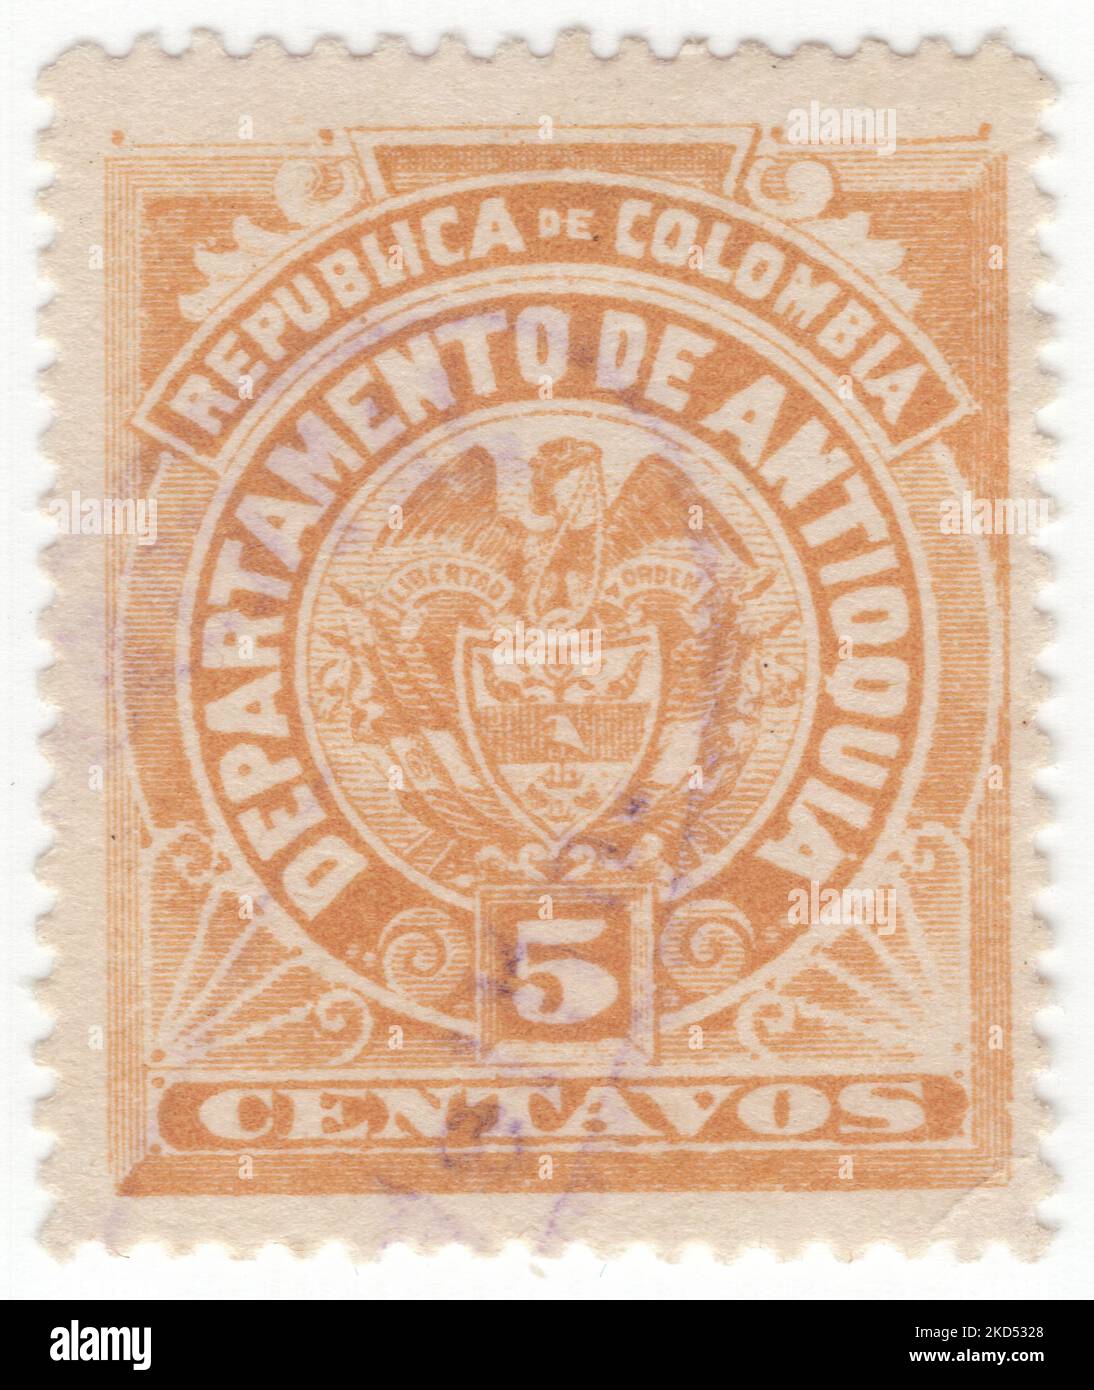 ANTIOQUIA - 1896: An 5 centavos yellow-buff postage stamp showing Coat of arms of Antioquia, originally a state, now a department of the republic of Colombia Stock Photo